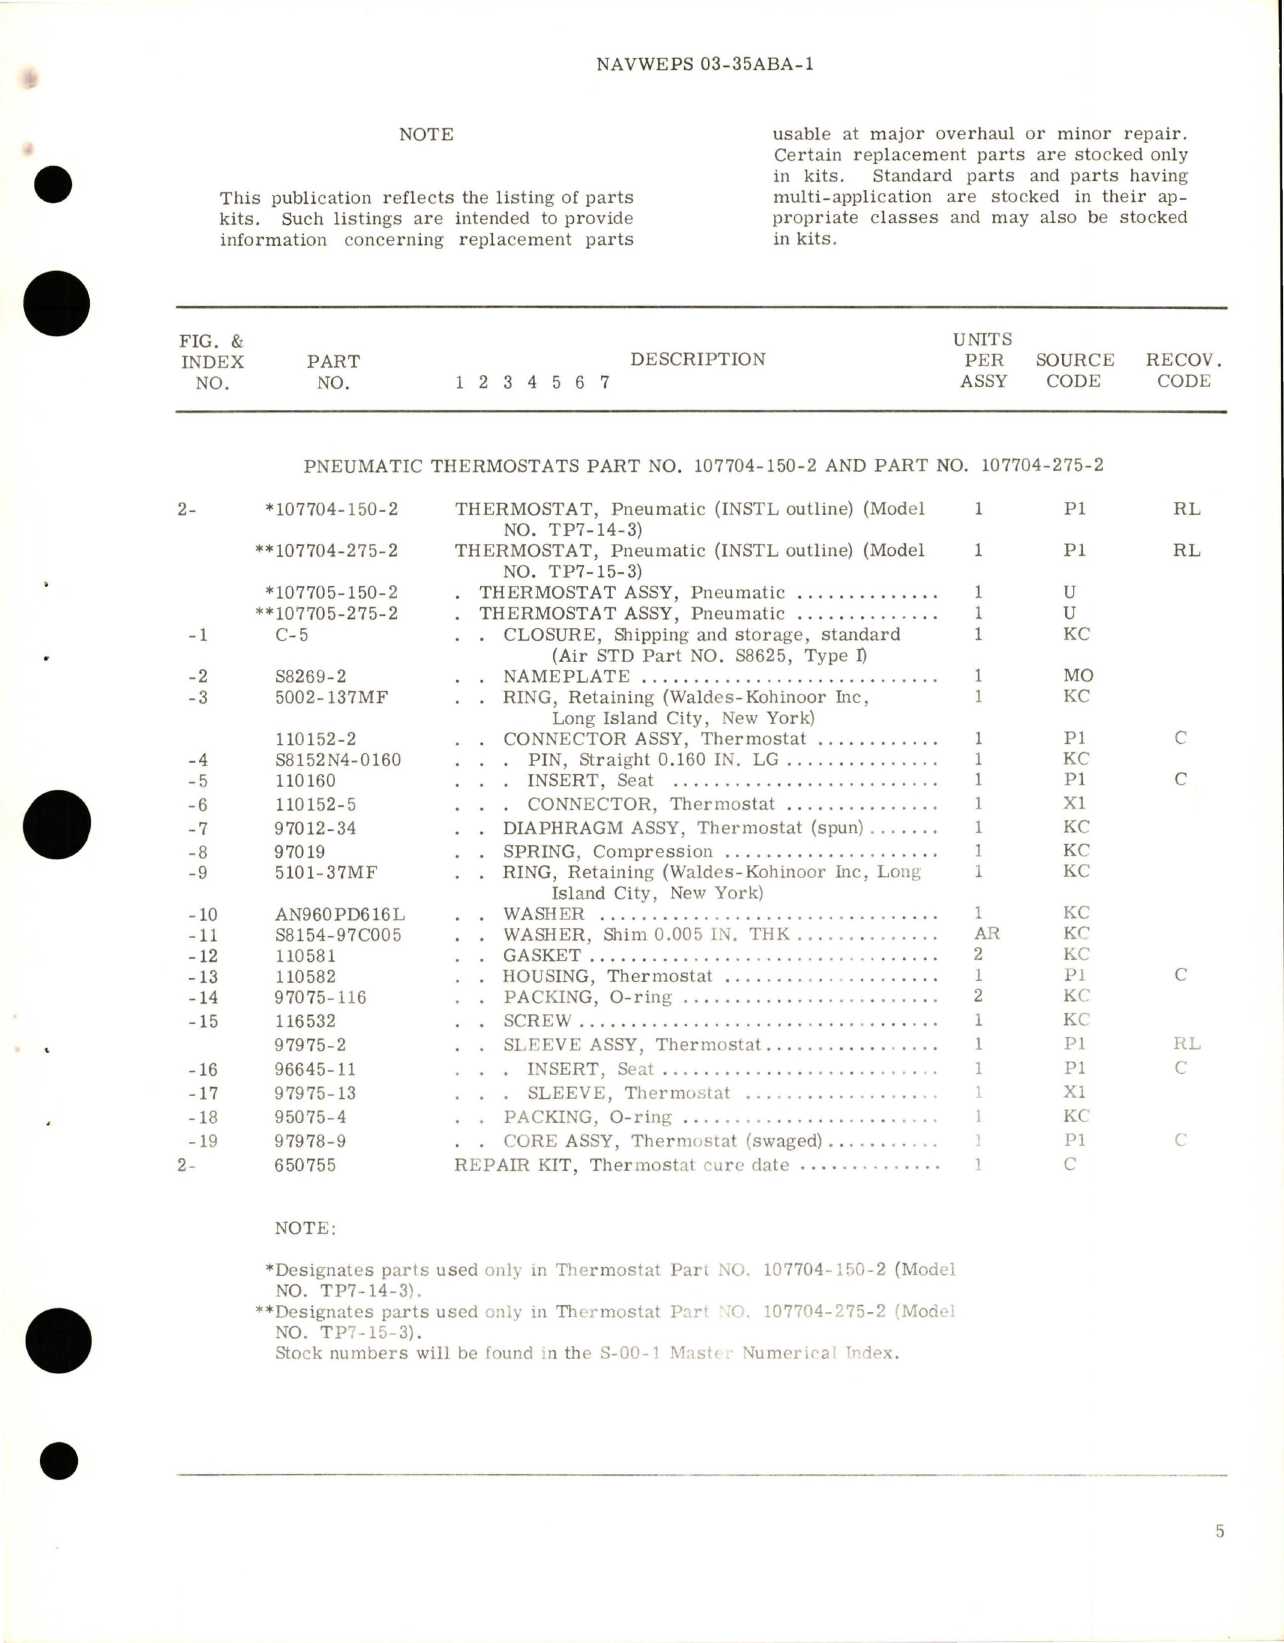 Sample page 5 from AirCorps Library document: Overhaul Instructions with Parts Breakdown for Pneumatic Thermostats - Parts 107704-150-2 and 107704-275-2